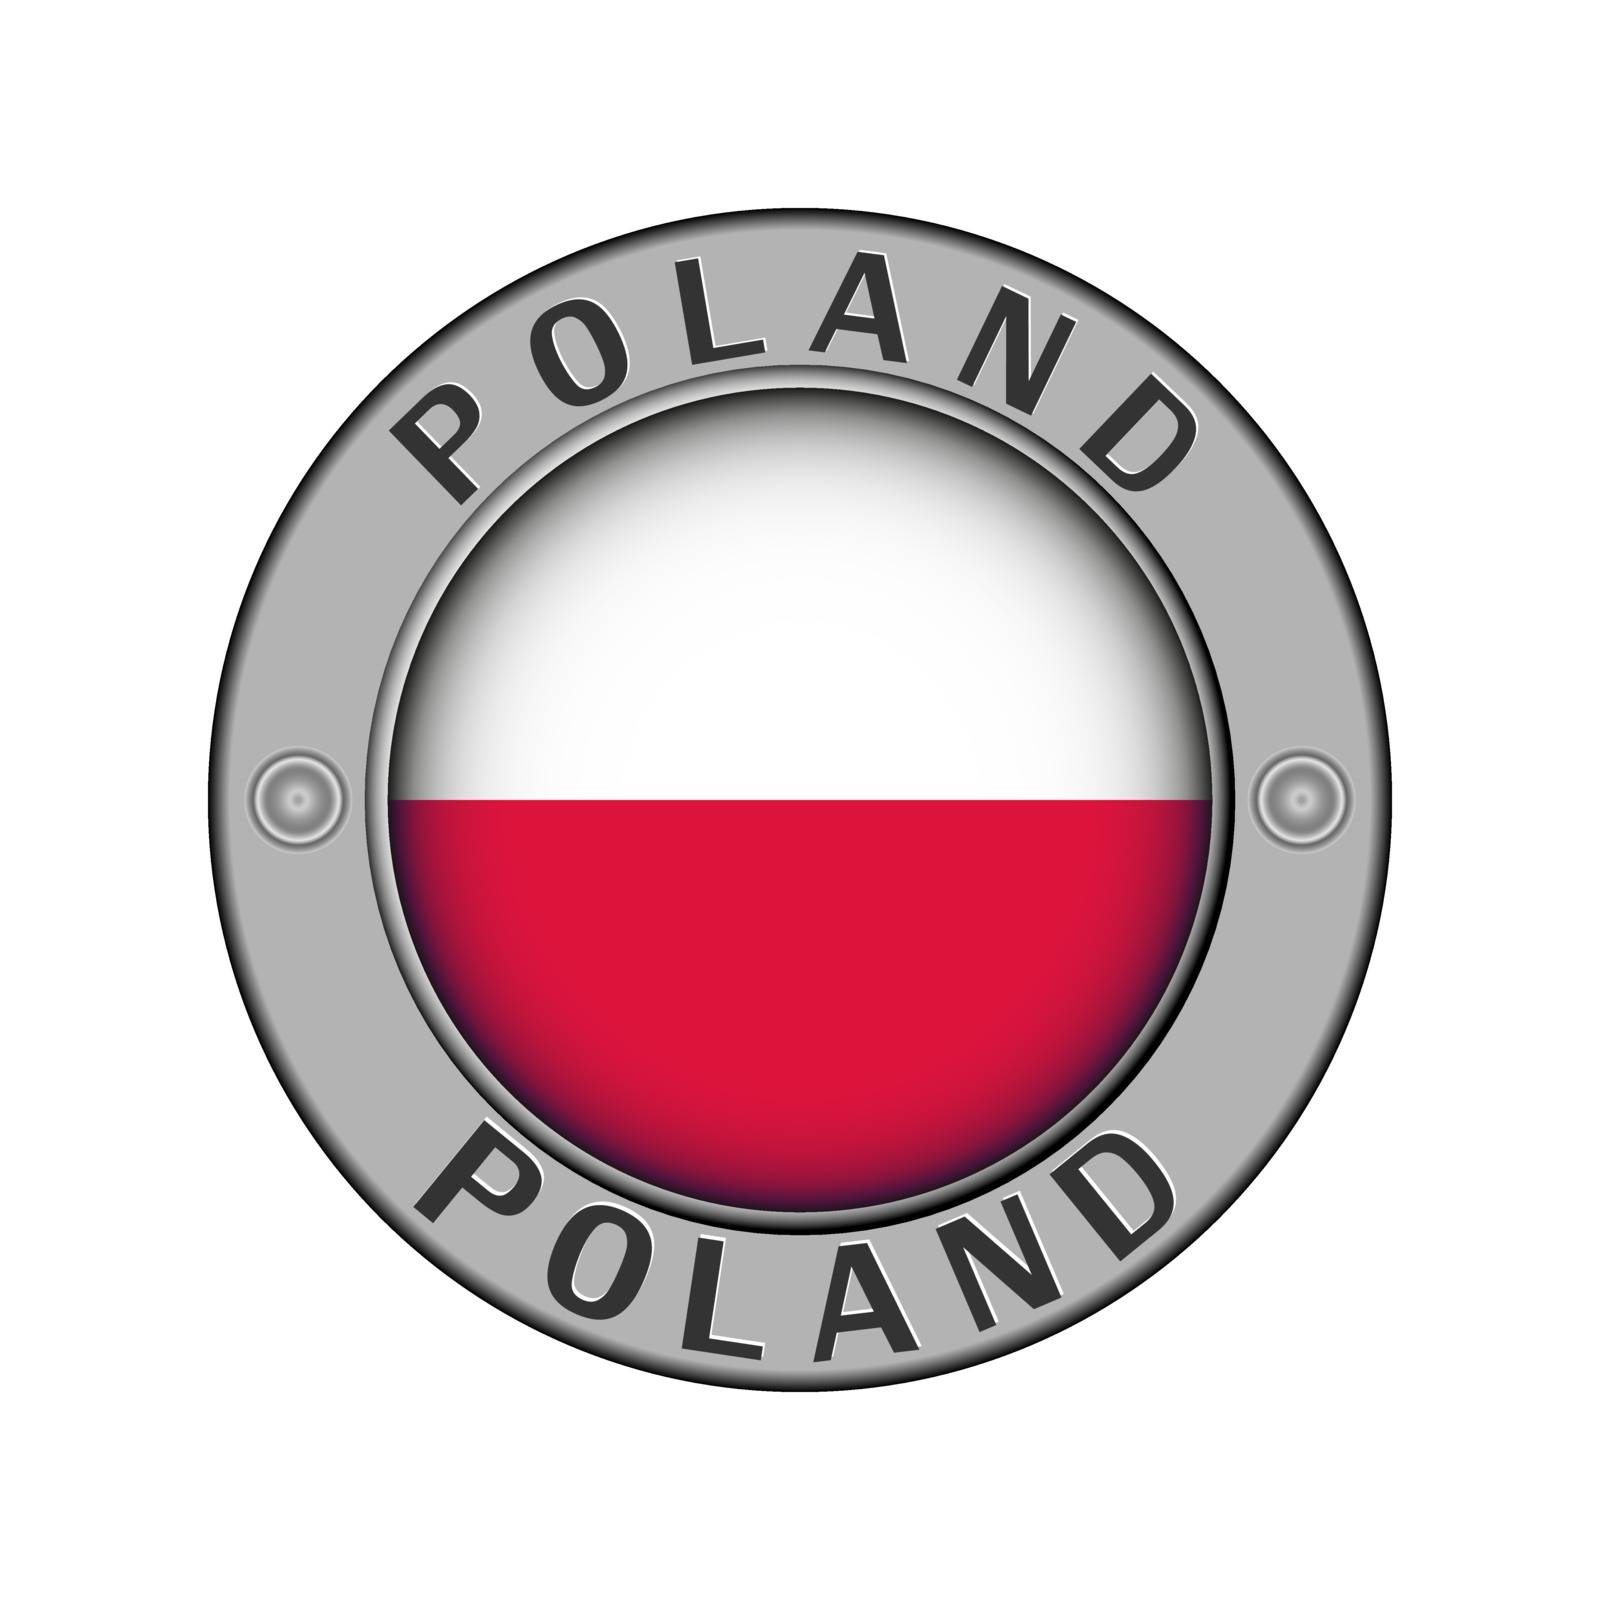 Round metal medallion with the name of the country of Poland and a round flag in the center
